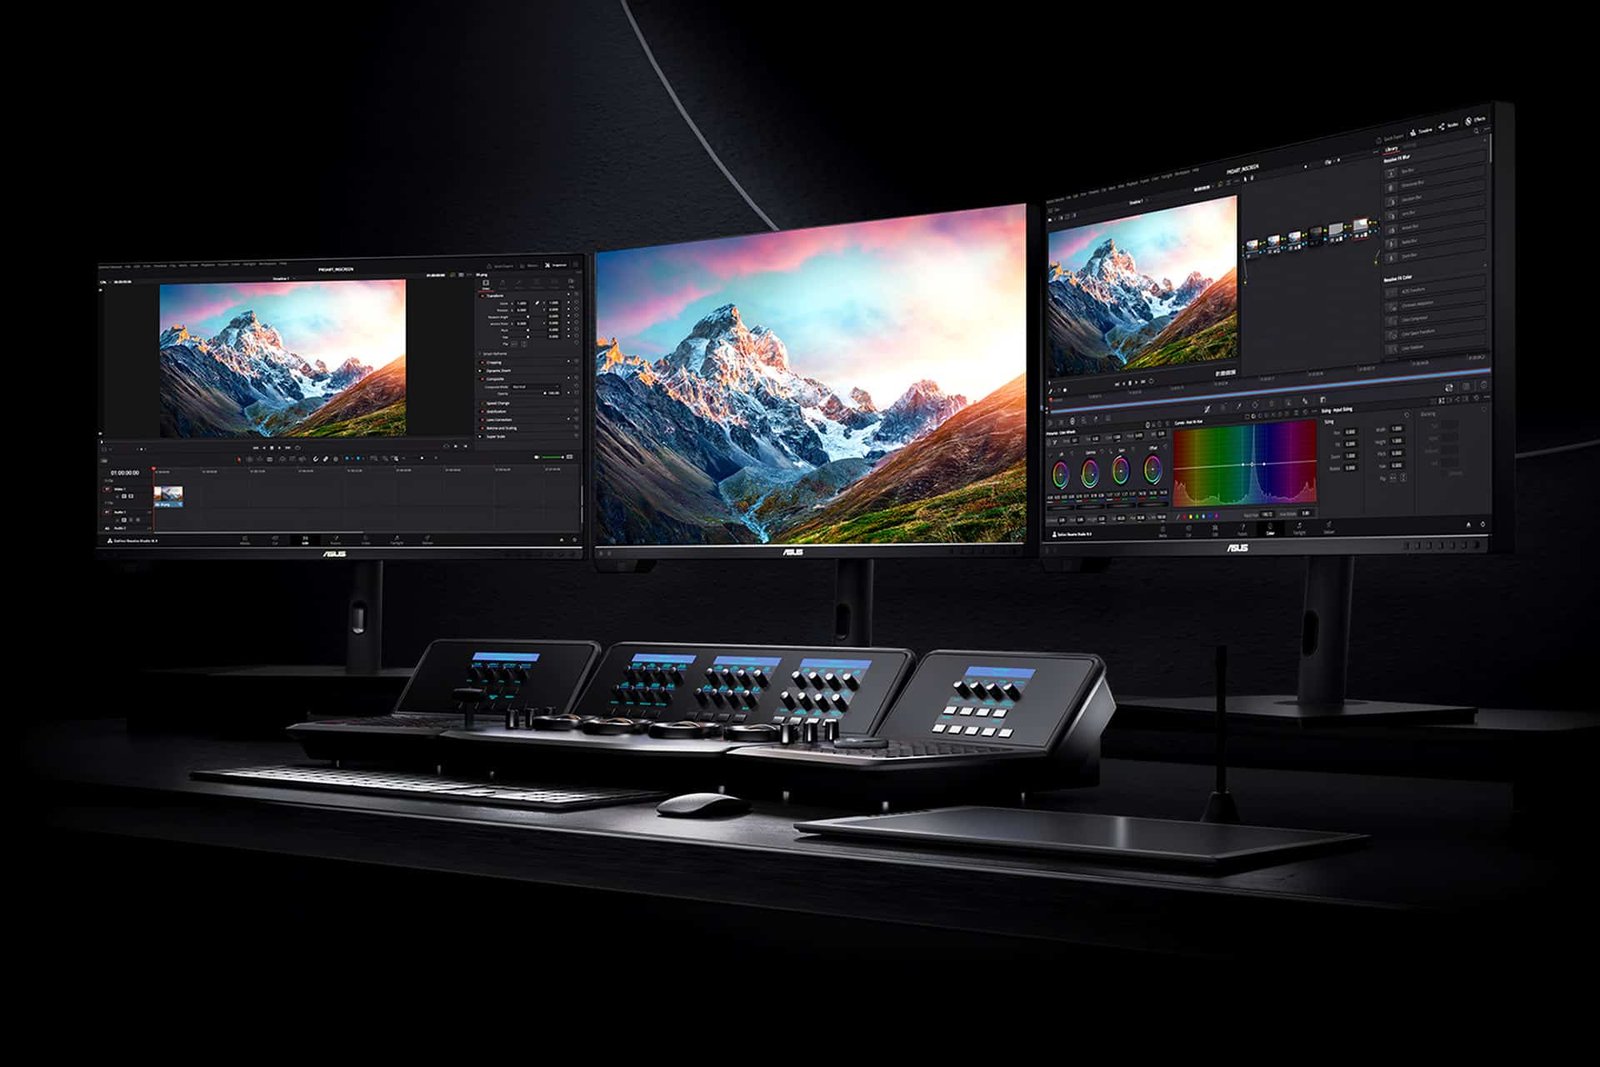 ASUS ProArt Display PA32UCXR: Elevate your creative workflow